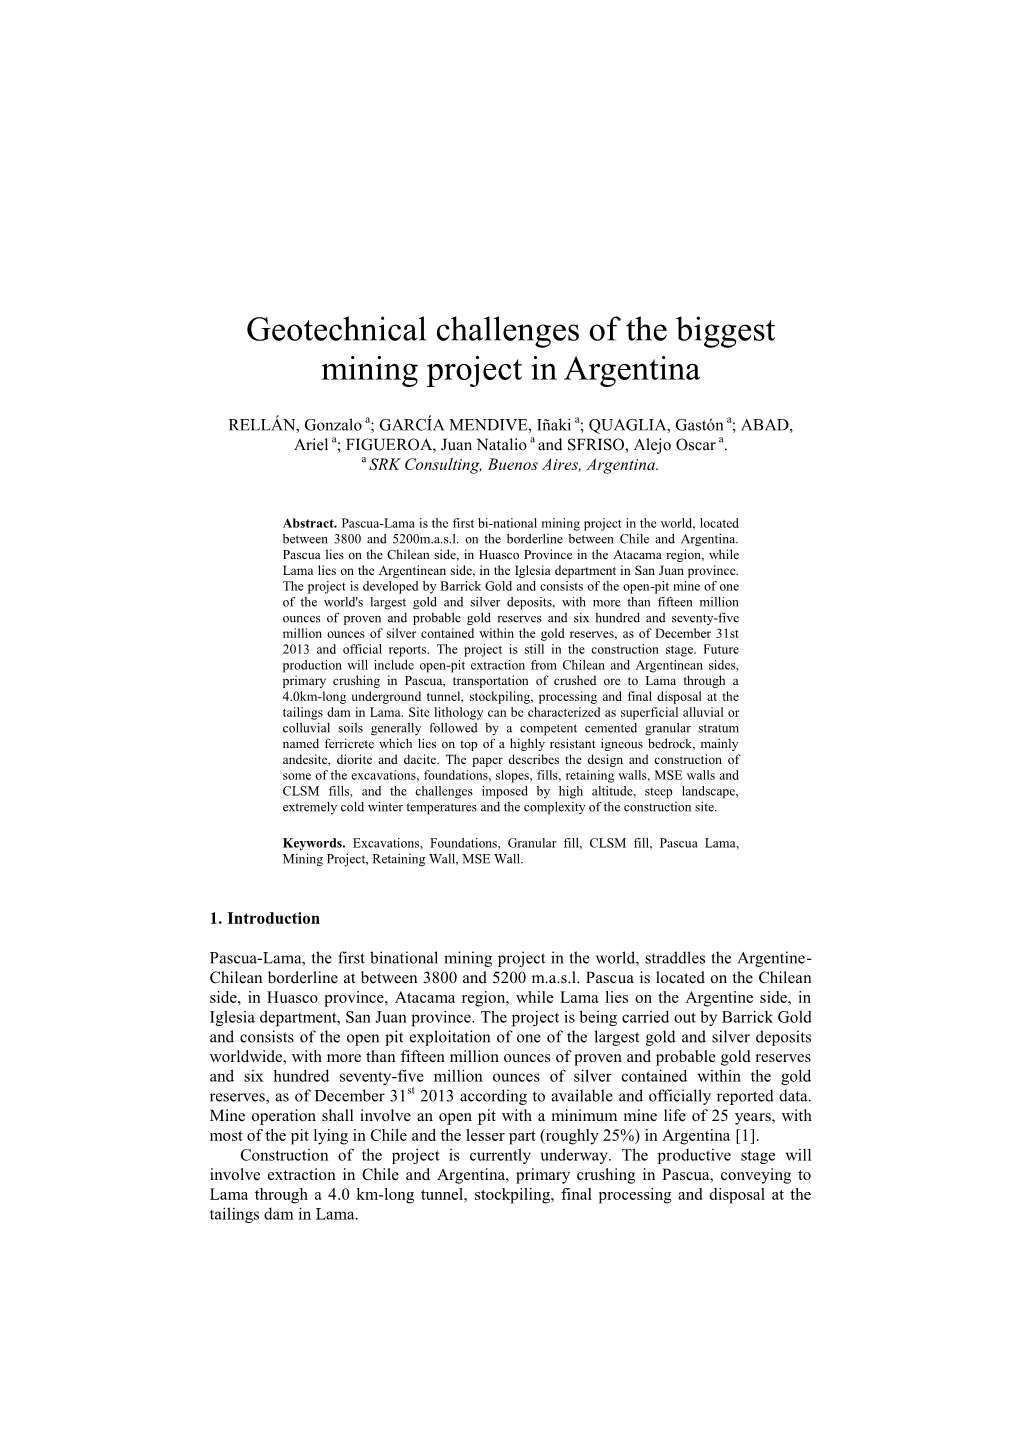 Geotechnical Challenges of the Biggest Mining Project in Argentina